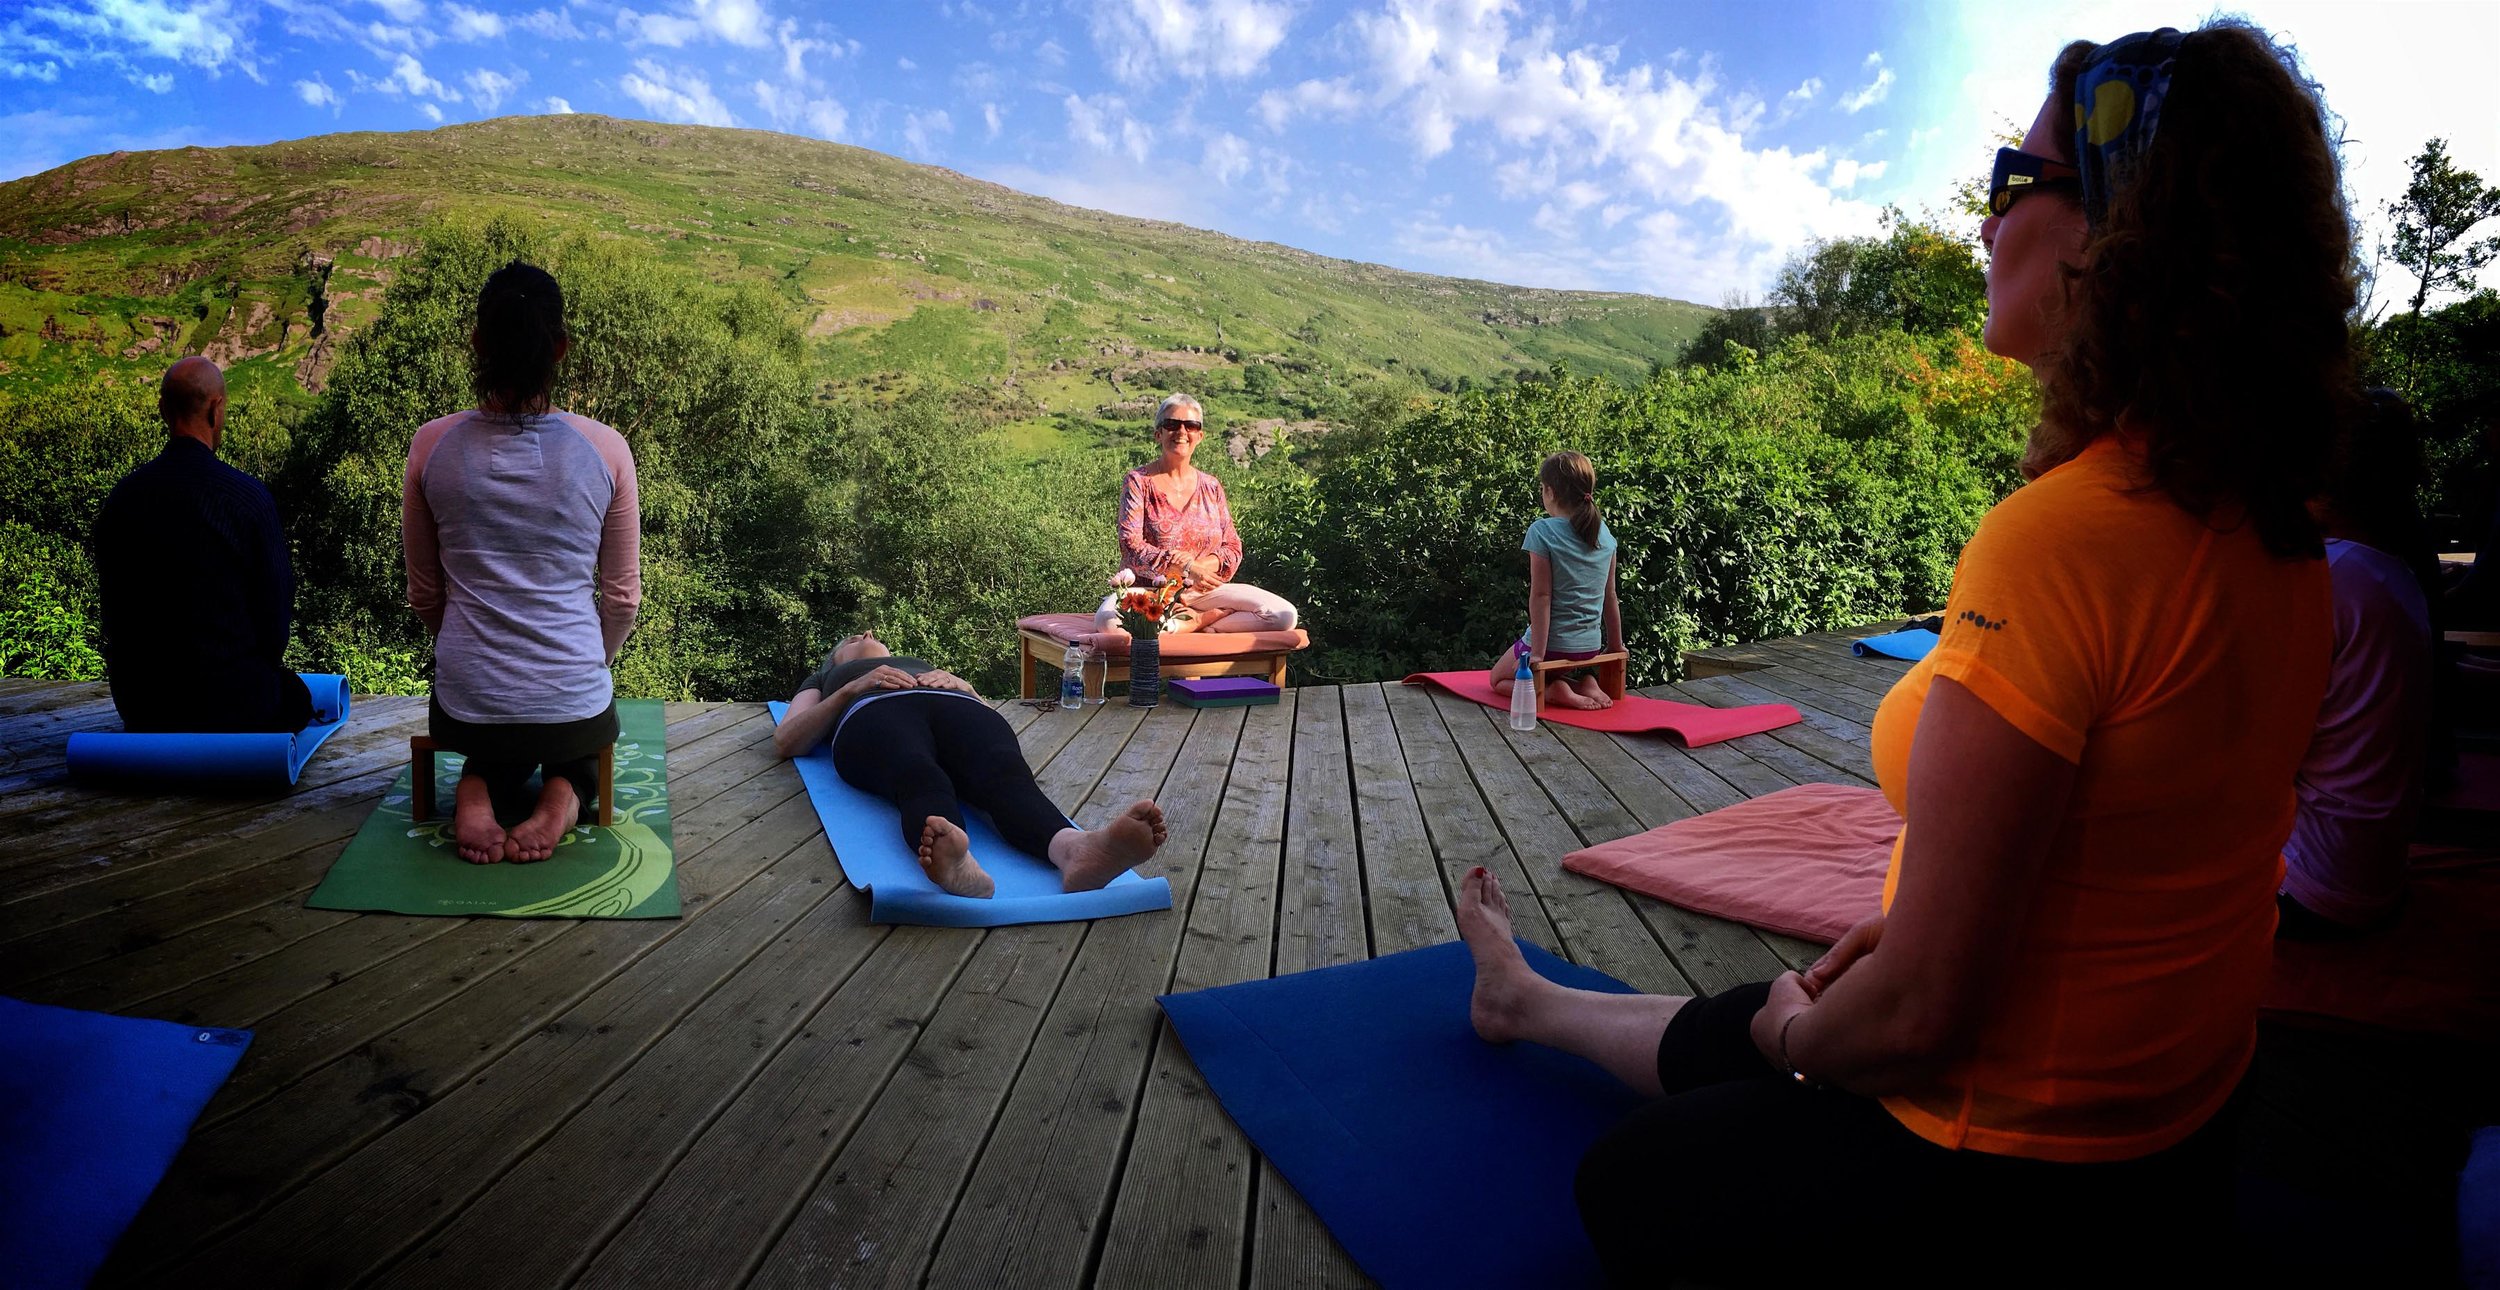  United Nations International Day of Yoga 2017  Yogadhara with a group of students out on the deck at the Kenmare Yoga Centre  